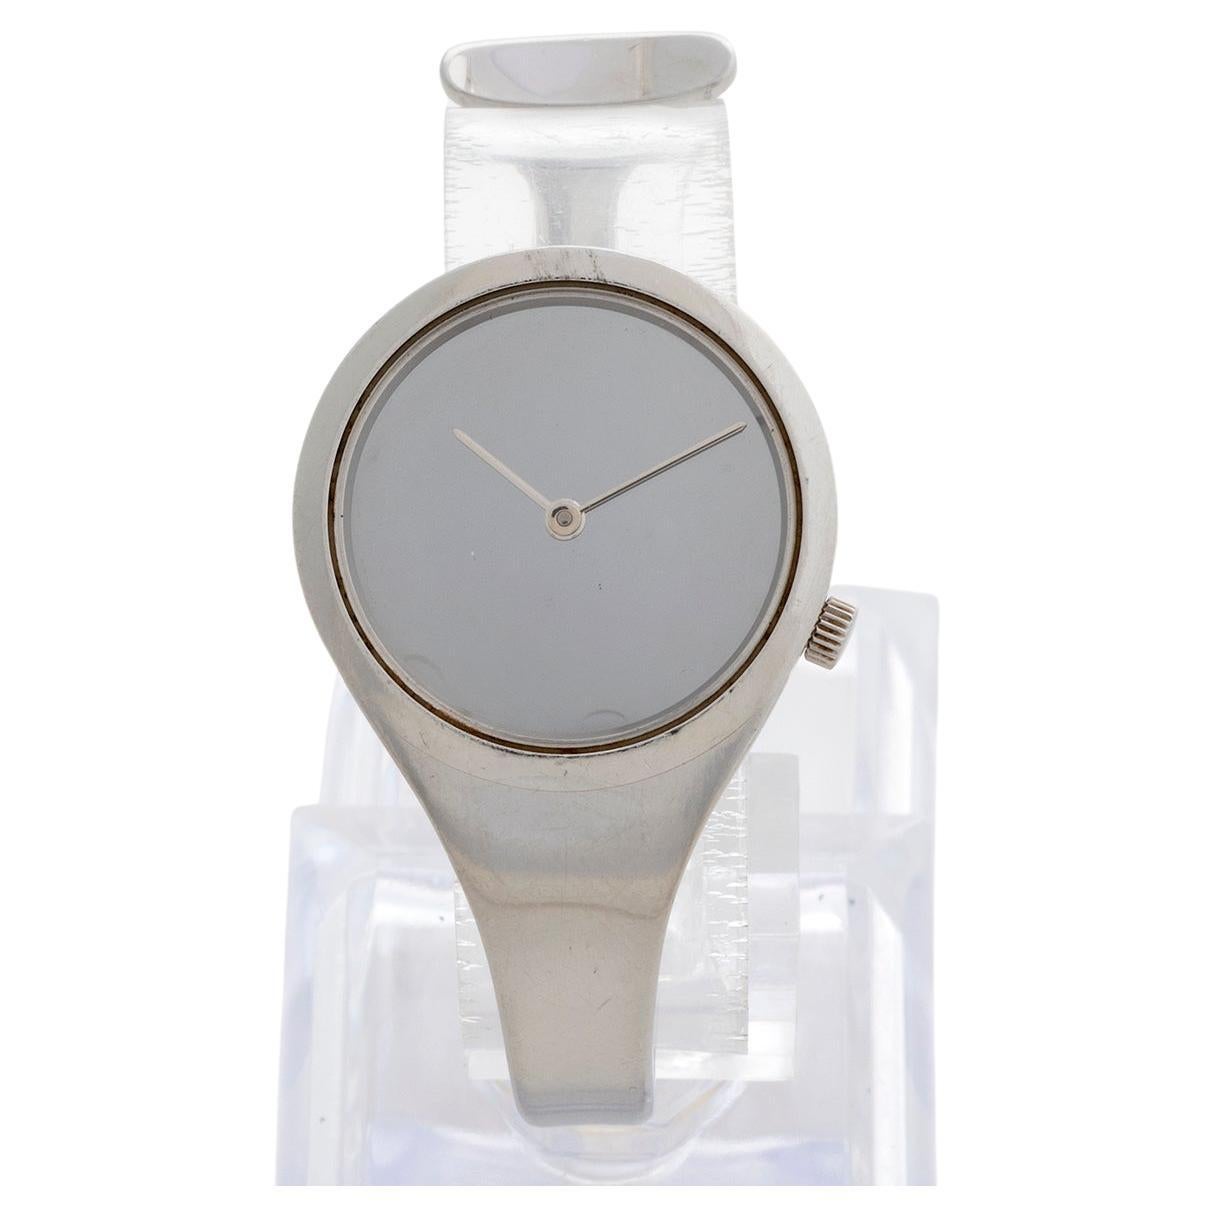 Named after its famous designer, Vivianna Torun Bulow-Hube, the Torun bangle watch is an icon of the Georg Jensen design house and was first launched in 1969. This example features the popular mirror dial, and is a all stainless steel reference 336,